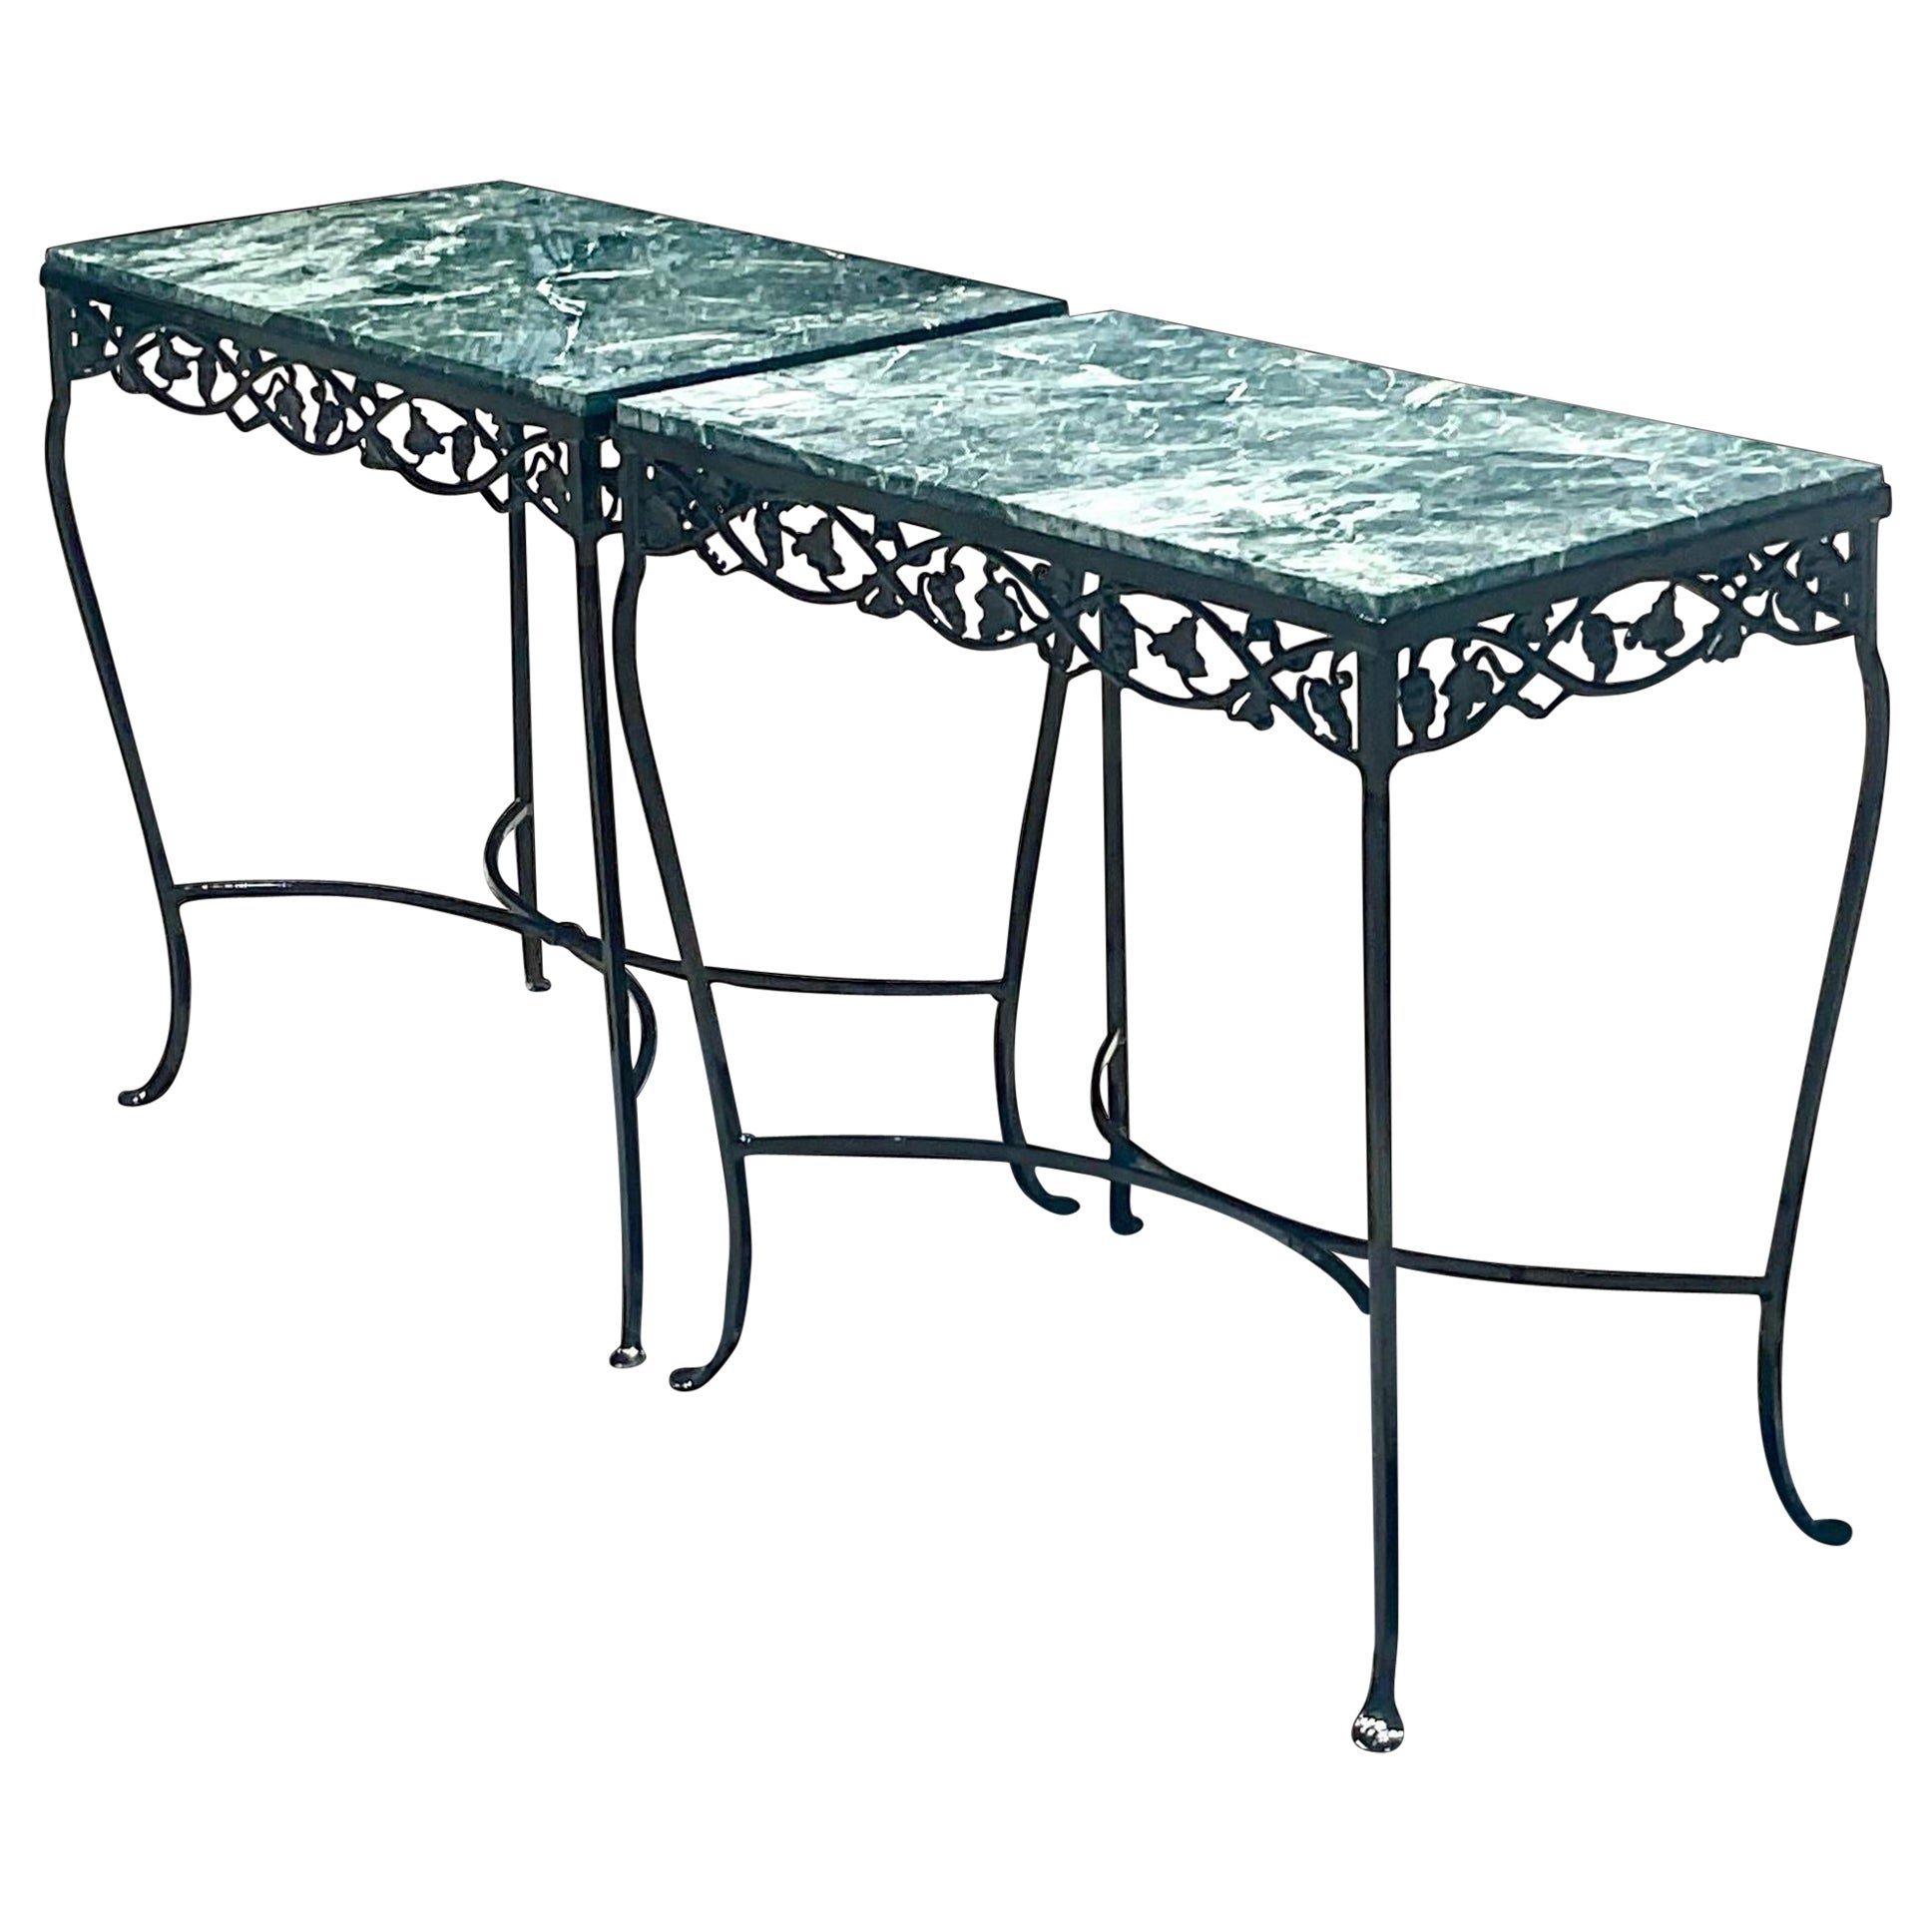 Vintage Regency Green Marble Wrought Iron Console Tables - a Pair For Sale